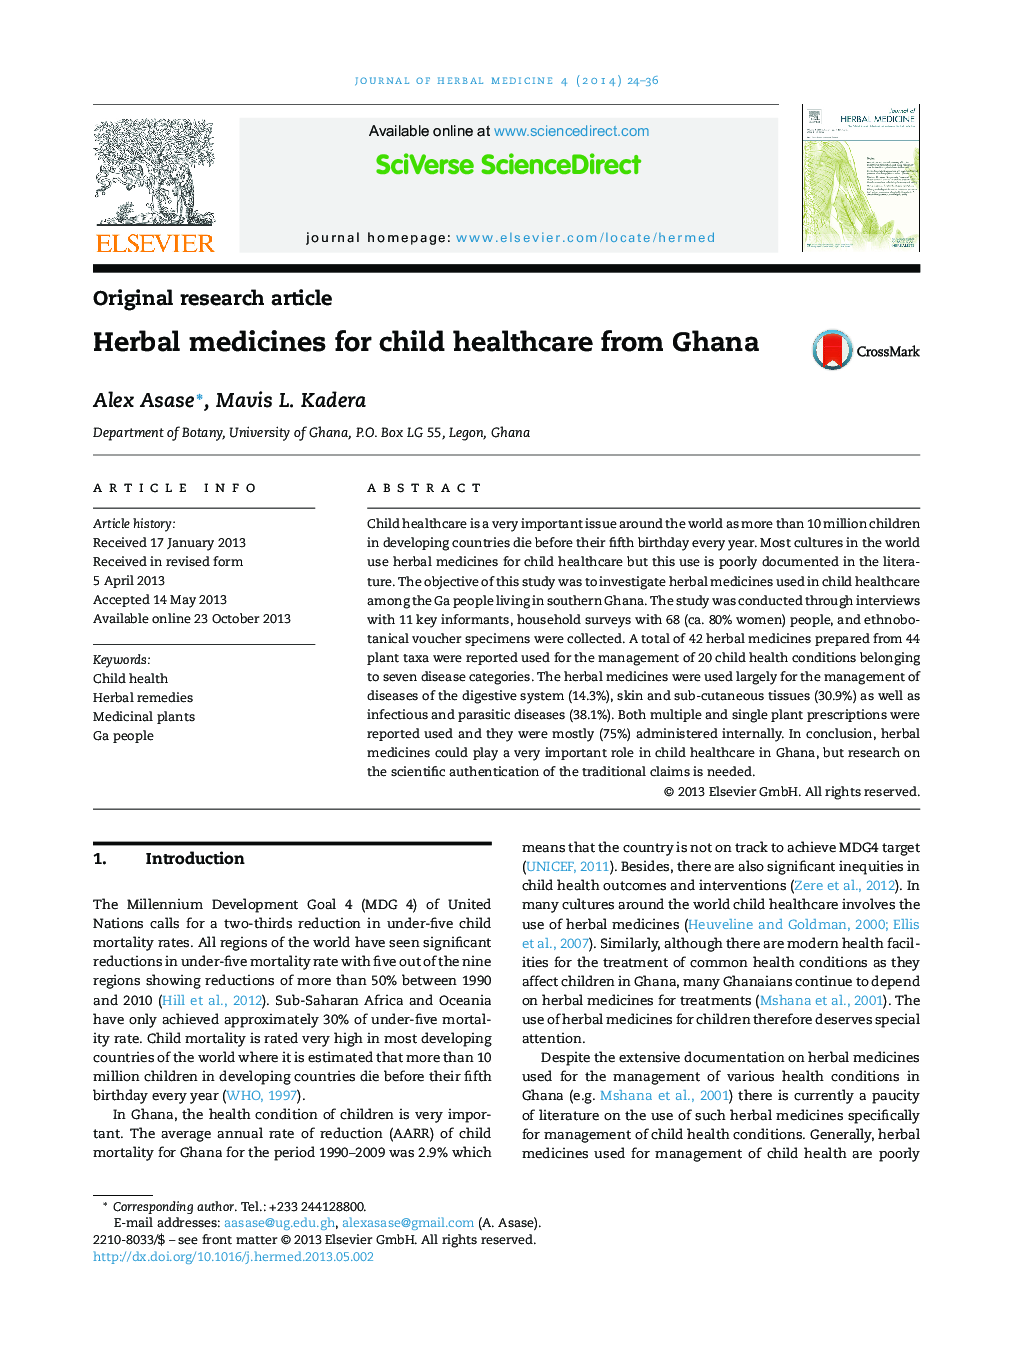 Herbal medicines for child healthcare from Ghana